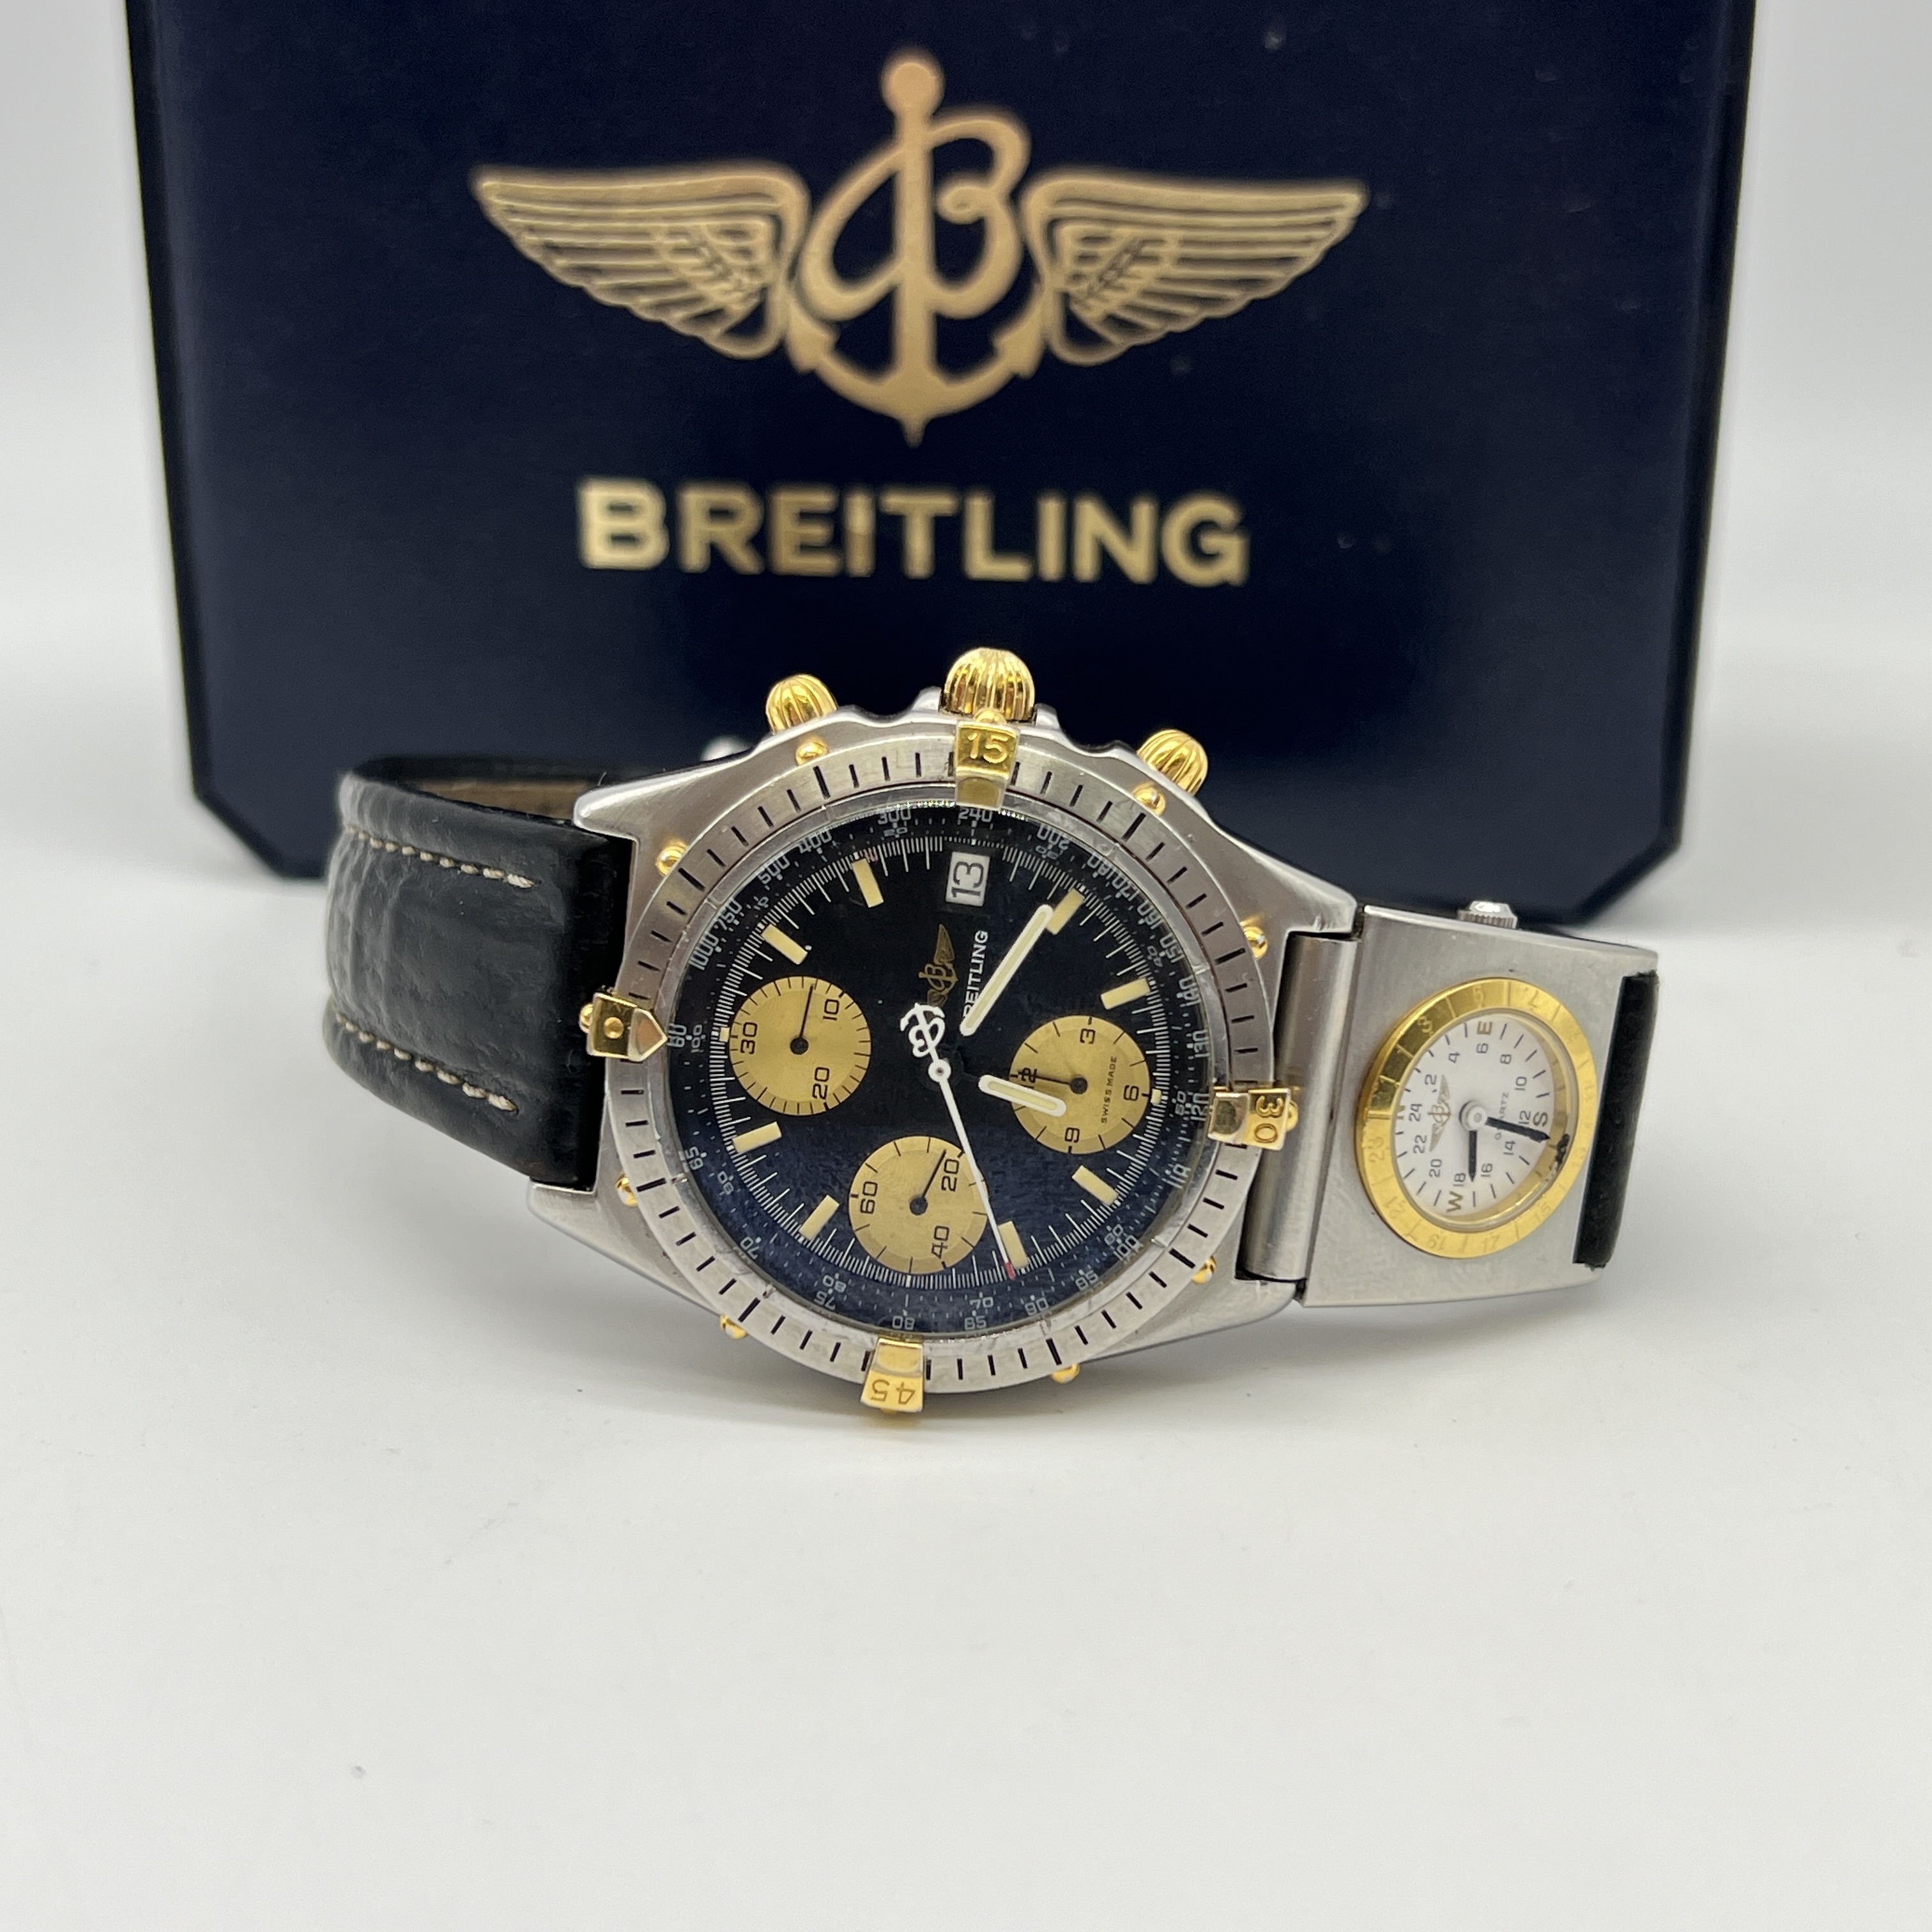 A Breitling chronograph stainless steel and gold watch - Image 5 of 11